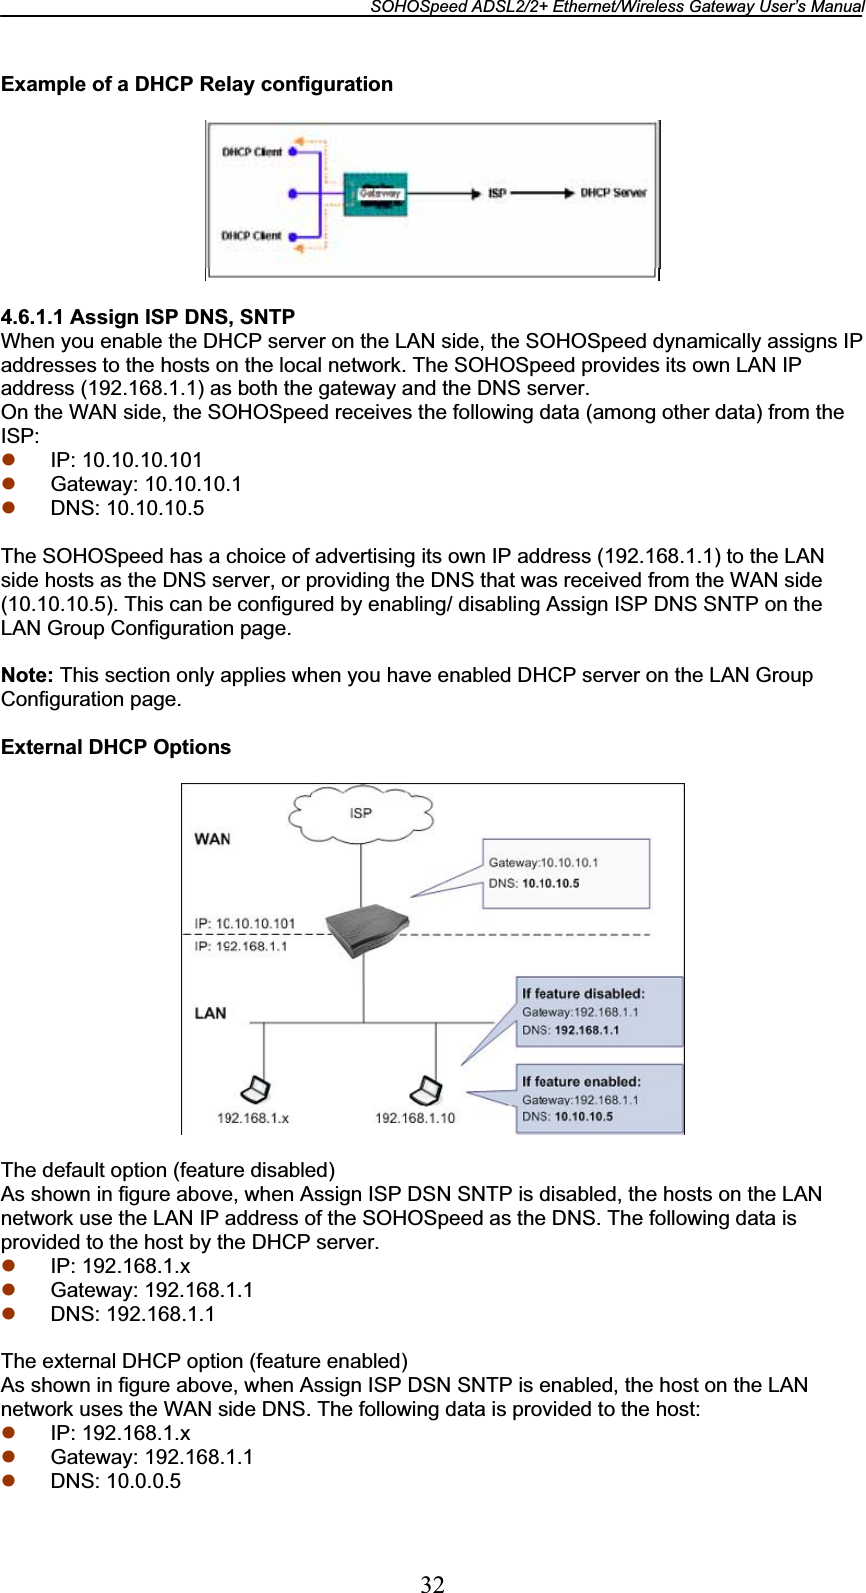 SOHOSpeed ADSL2/2+ Ethernet/Wireless Gateway User’s Manual 32Example of a DHCP Relay configuration 4.6.1.1 Assign ISP DNS, SNTP When you enable the DHCP server on the LAN side, the SOHOSpeed dynamically assigns IP addresses to the hosts on the local network. The SOHOSpeed provides its own LAN IP address (192.168.1.1) as both the gateway and the DNS server. On the WAN side, the SOHOSpeed receives the following data (among other data) from the ISP:z IP: 10.10.10.101 z Gateway: 10.10.10.1 z DNS: 10.10.10.5 The SOHOSpeed has a choice of advertising its own IP address (192.168.1.1) to the LAN side hosts as the DNS server, or providing the DNS that was received from the WAN side (10.10.10.5). This can be configured by enabling/ disabling Assign ISP DNS SNTP on the LAN Group Configuration page. Note: This section only applies when you have enabled DHCP server on the LAN Group Configuration page. External DHCP Options The default option (feature disabled) As shown in figure above, when Assign ISP DSN SNTP is disabled, the hosts on the LAN network use the LAN IP address of the SOHOSpeed as the DNS. The following data is provided to the host by the DHCP server. z IP: 192.168.1.x z Gateway: 192.168.1.1 z DNS: 192.168.1.1 The external DHCP option (feature enabled) As shown in figure above, when Assign ISP DSN SNTP is enabled, the host on the LAN network uses the WAN side DNS. The following data is provided to the host: z IP: 192.168.1.x z Gateway: 192.168.1.1 z DNS: 10.0.0.5 